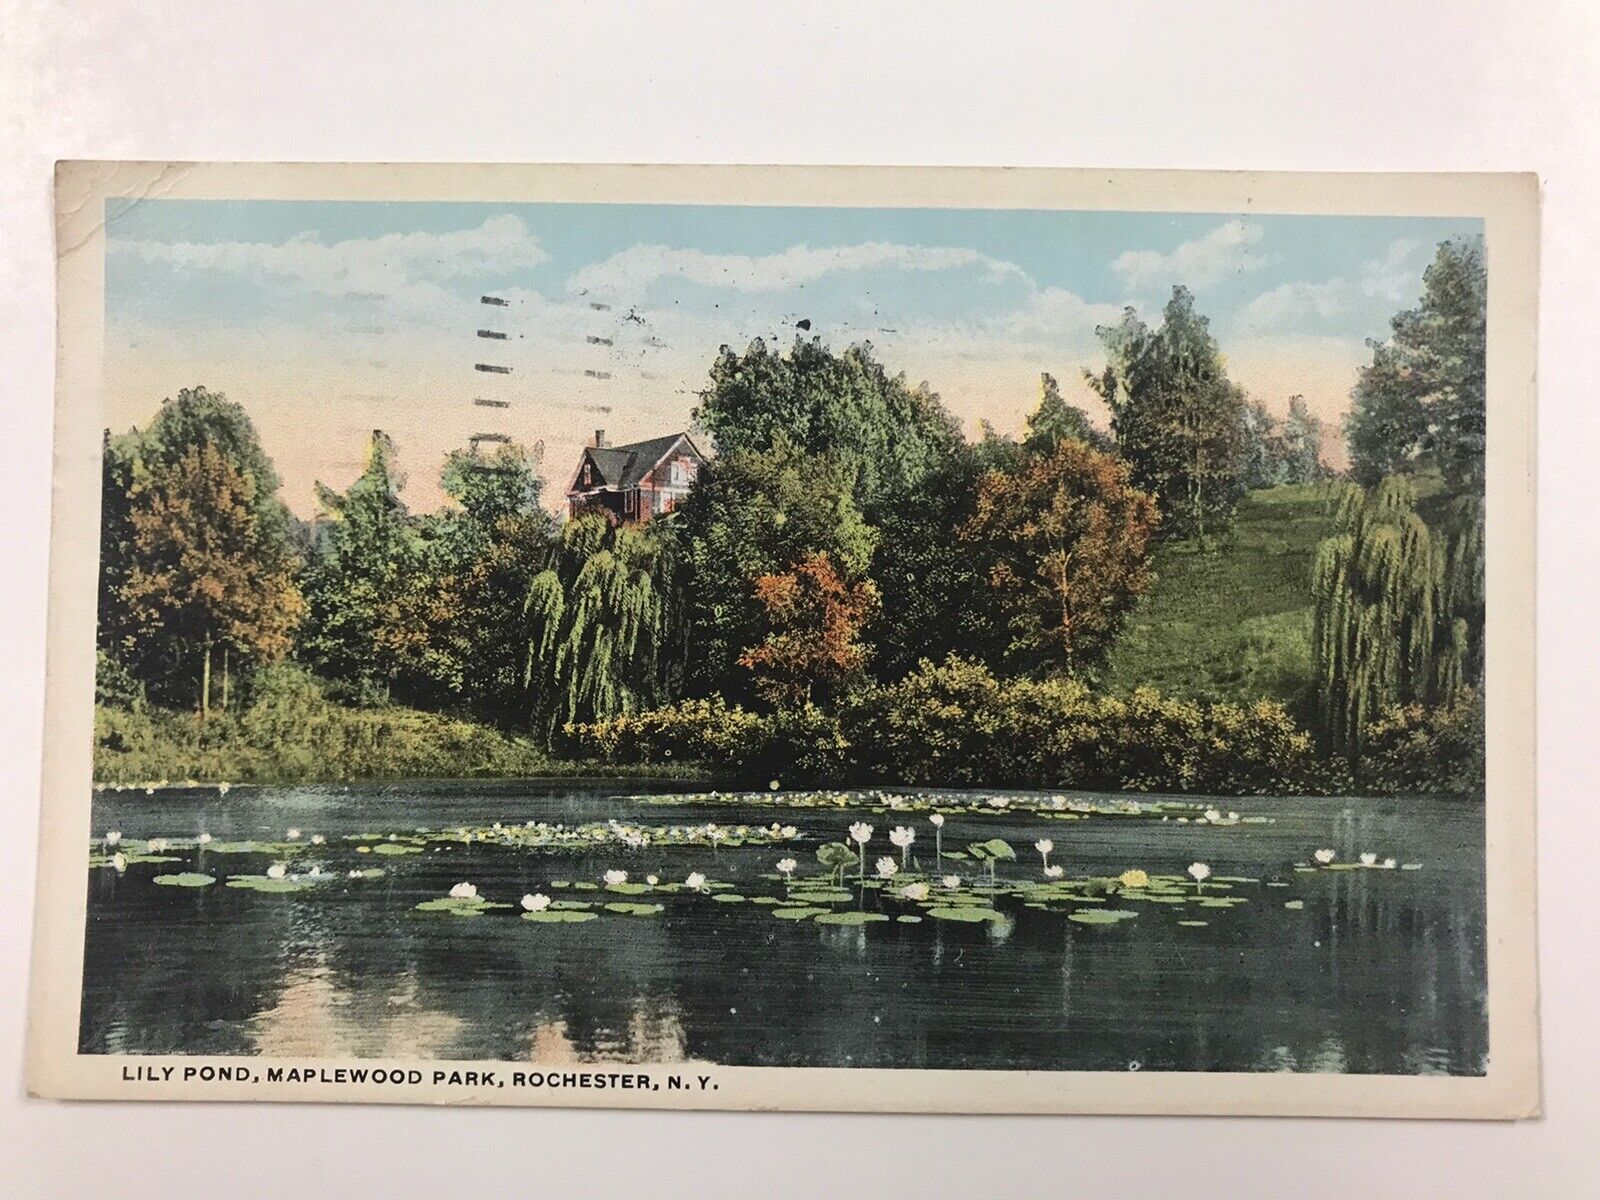 vintage 1921 Lily pond Maplewood park Rochester N Y post card